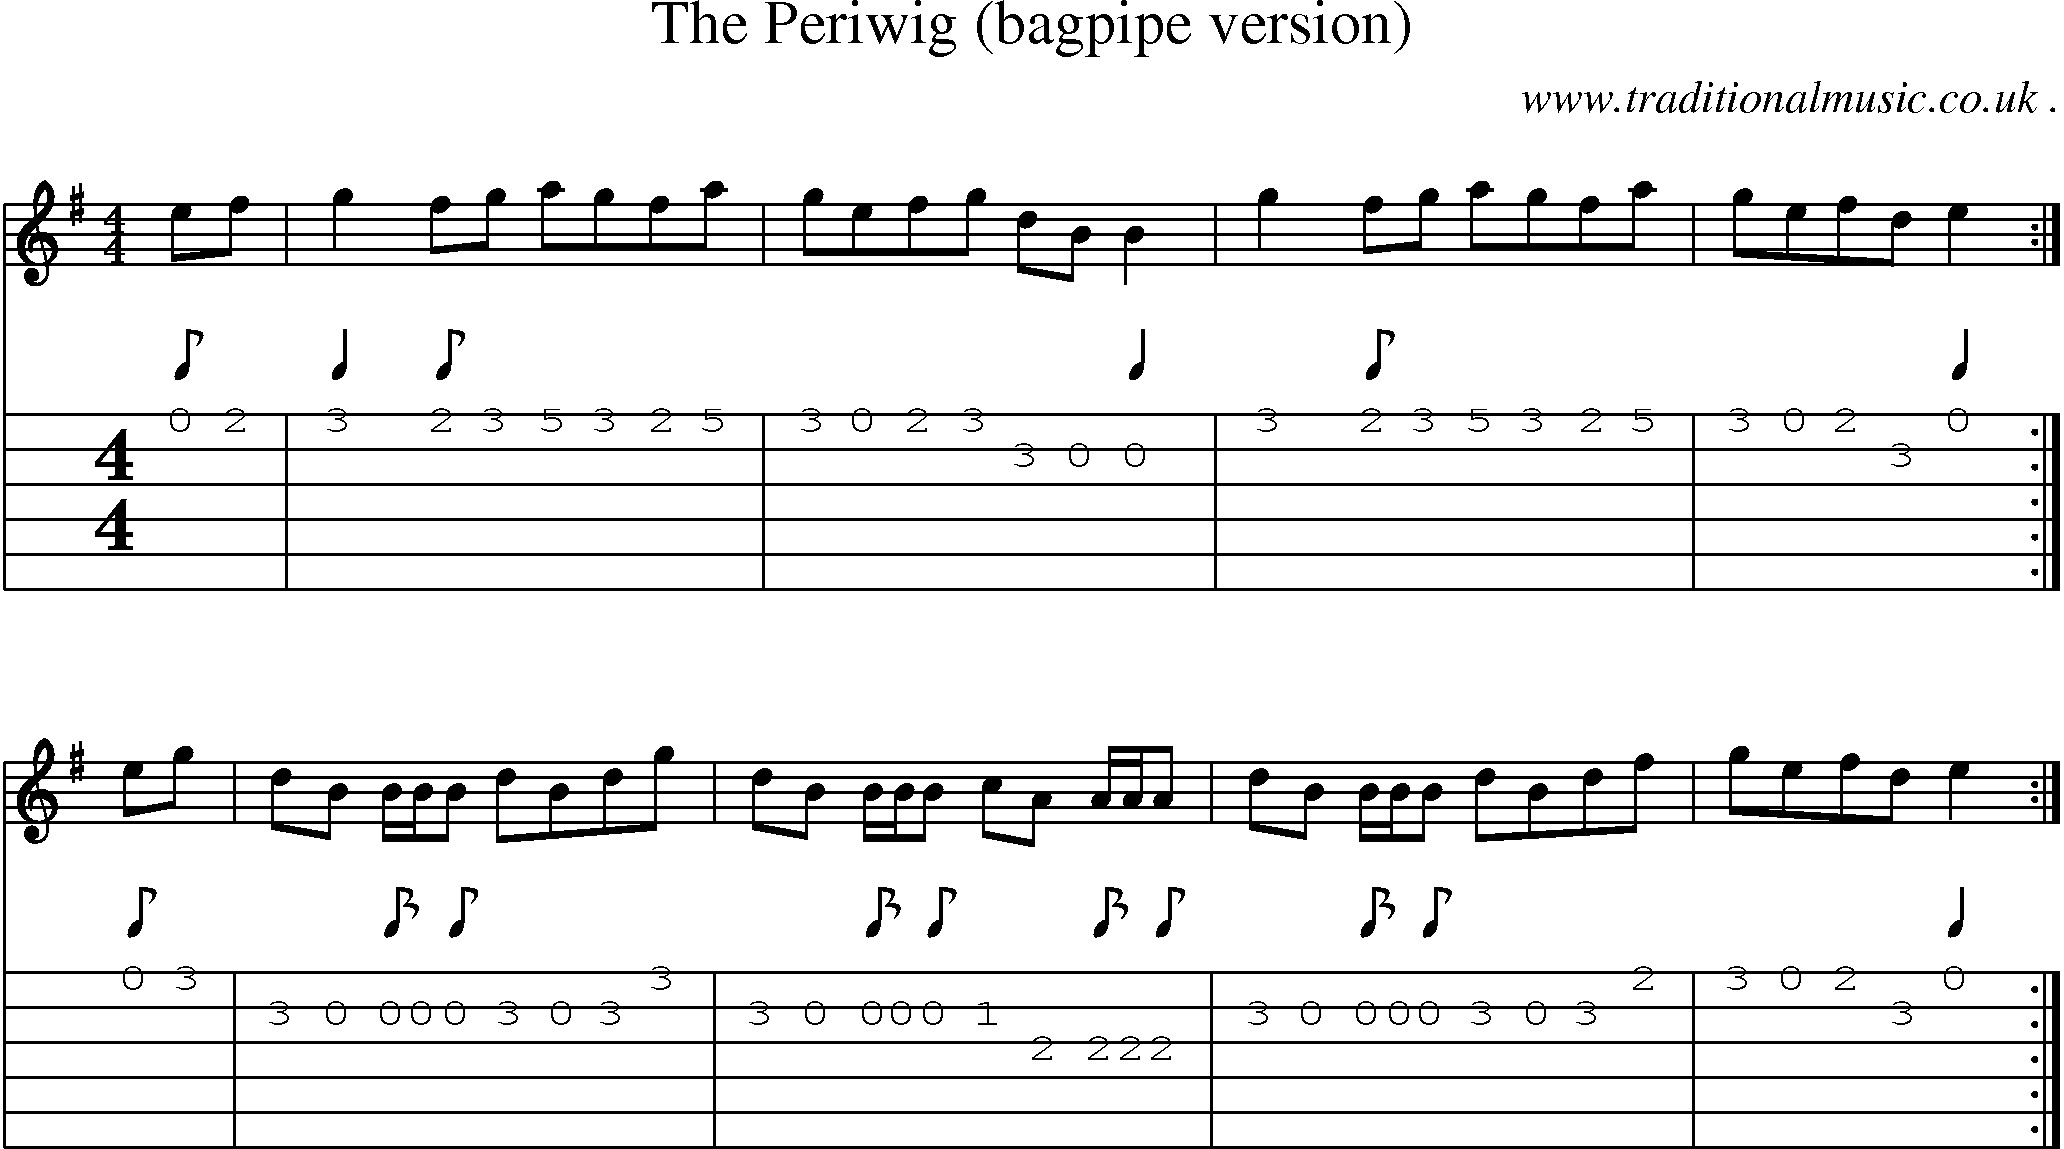 Sheet-music  score, Chords and Guitar Tabs for The Periwig Bagpipe Version